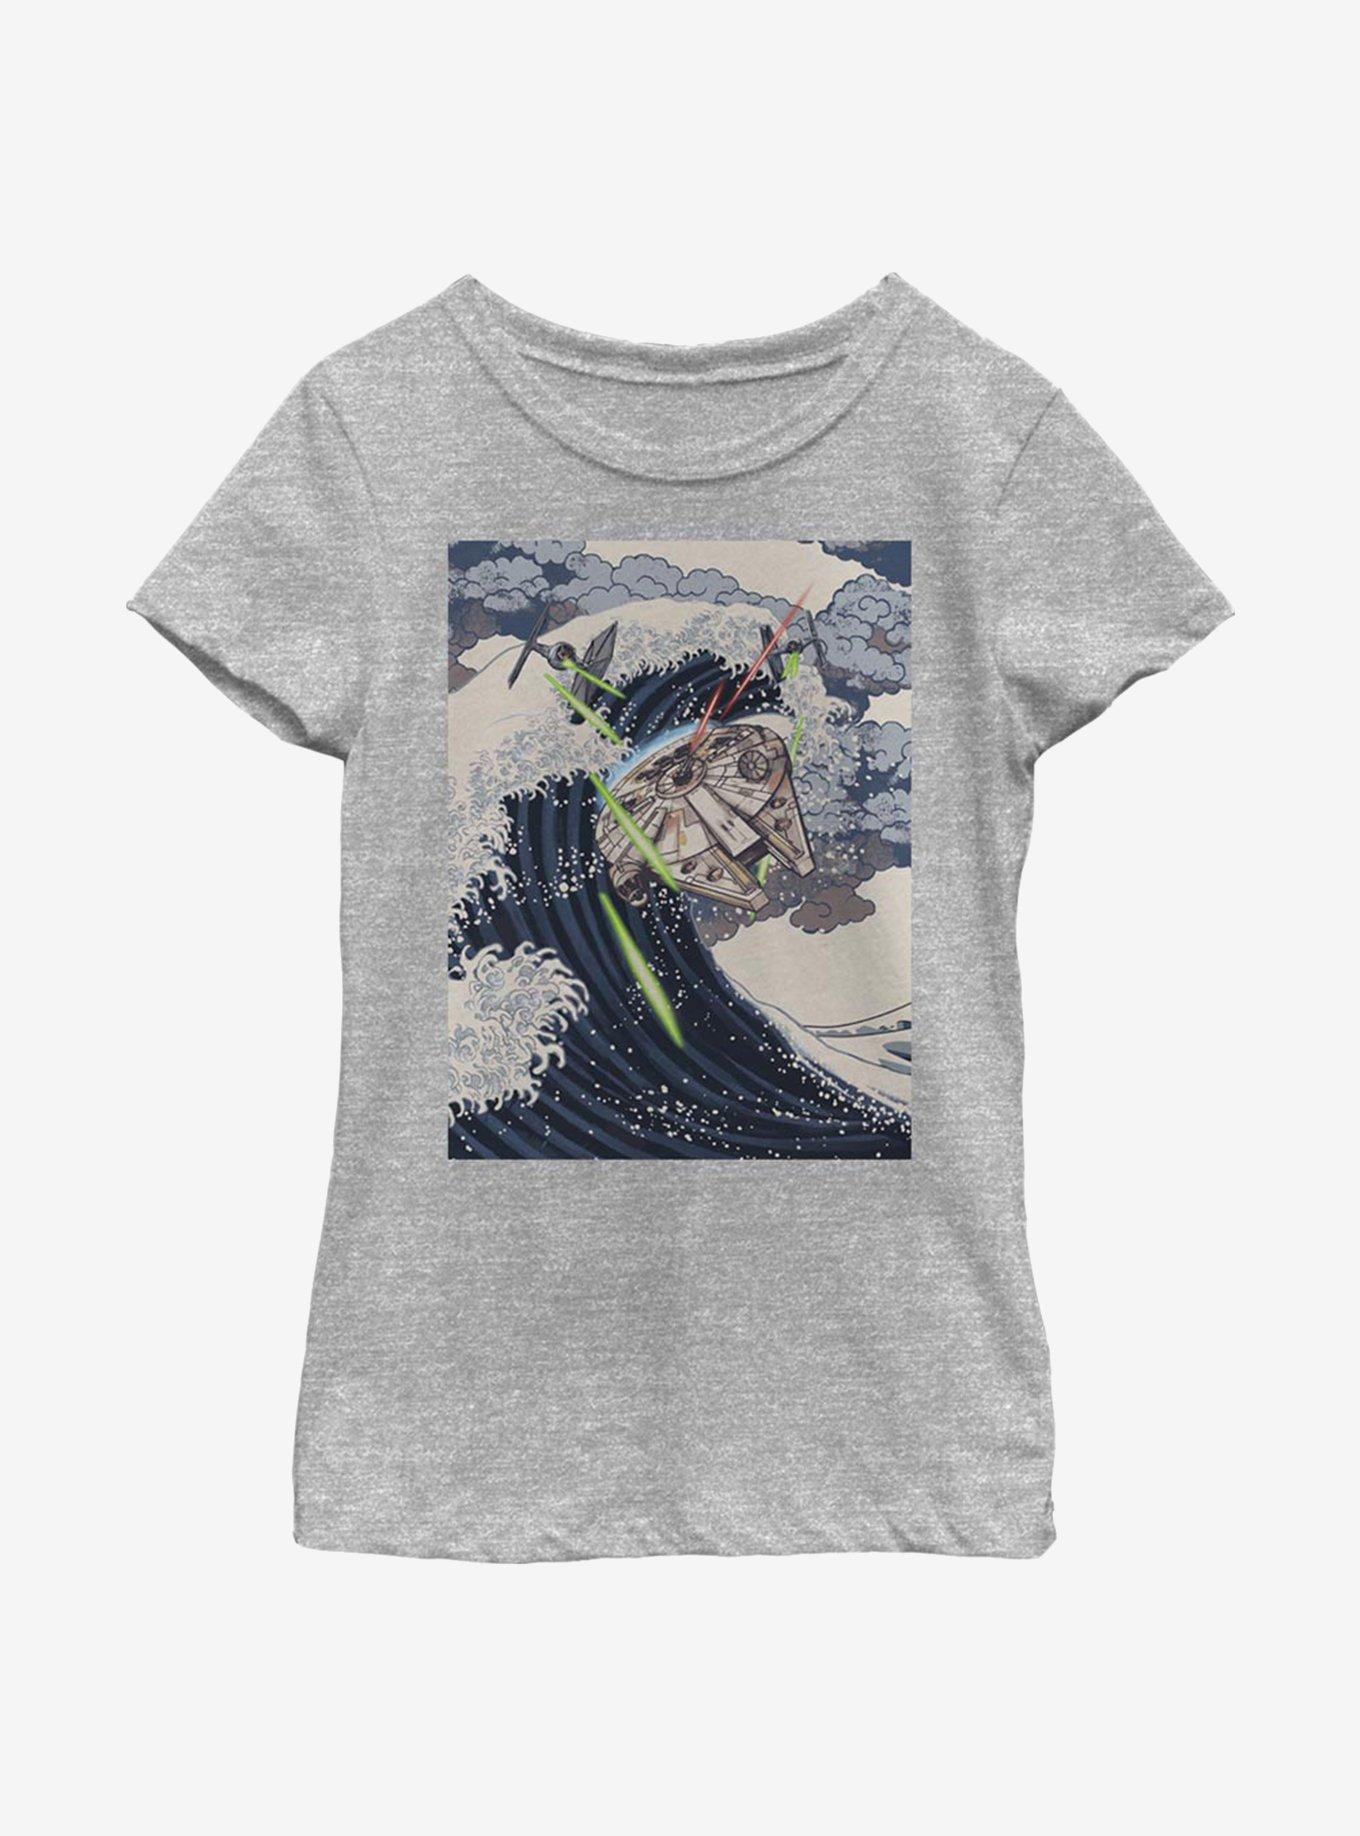 Star Wars Space Wave Youth Girls T-Shirt, ATH HTR, hi-res